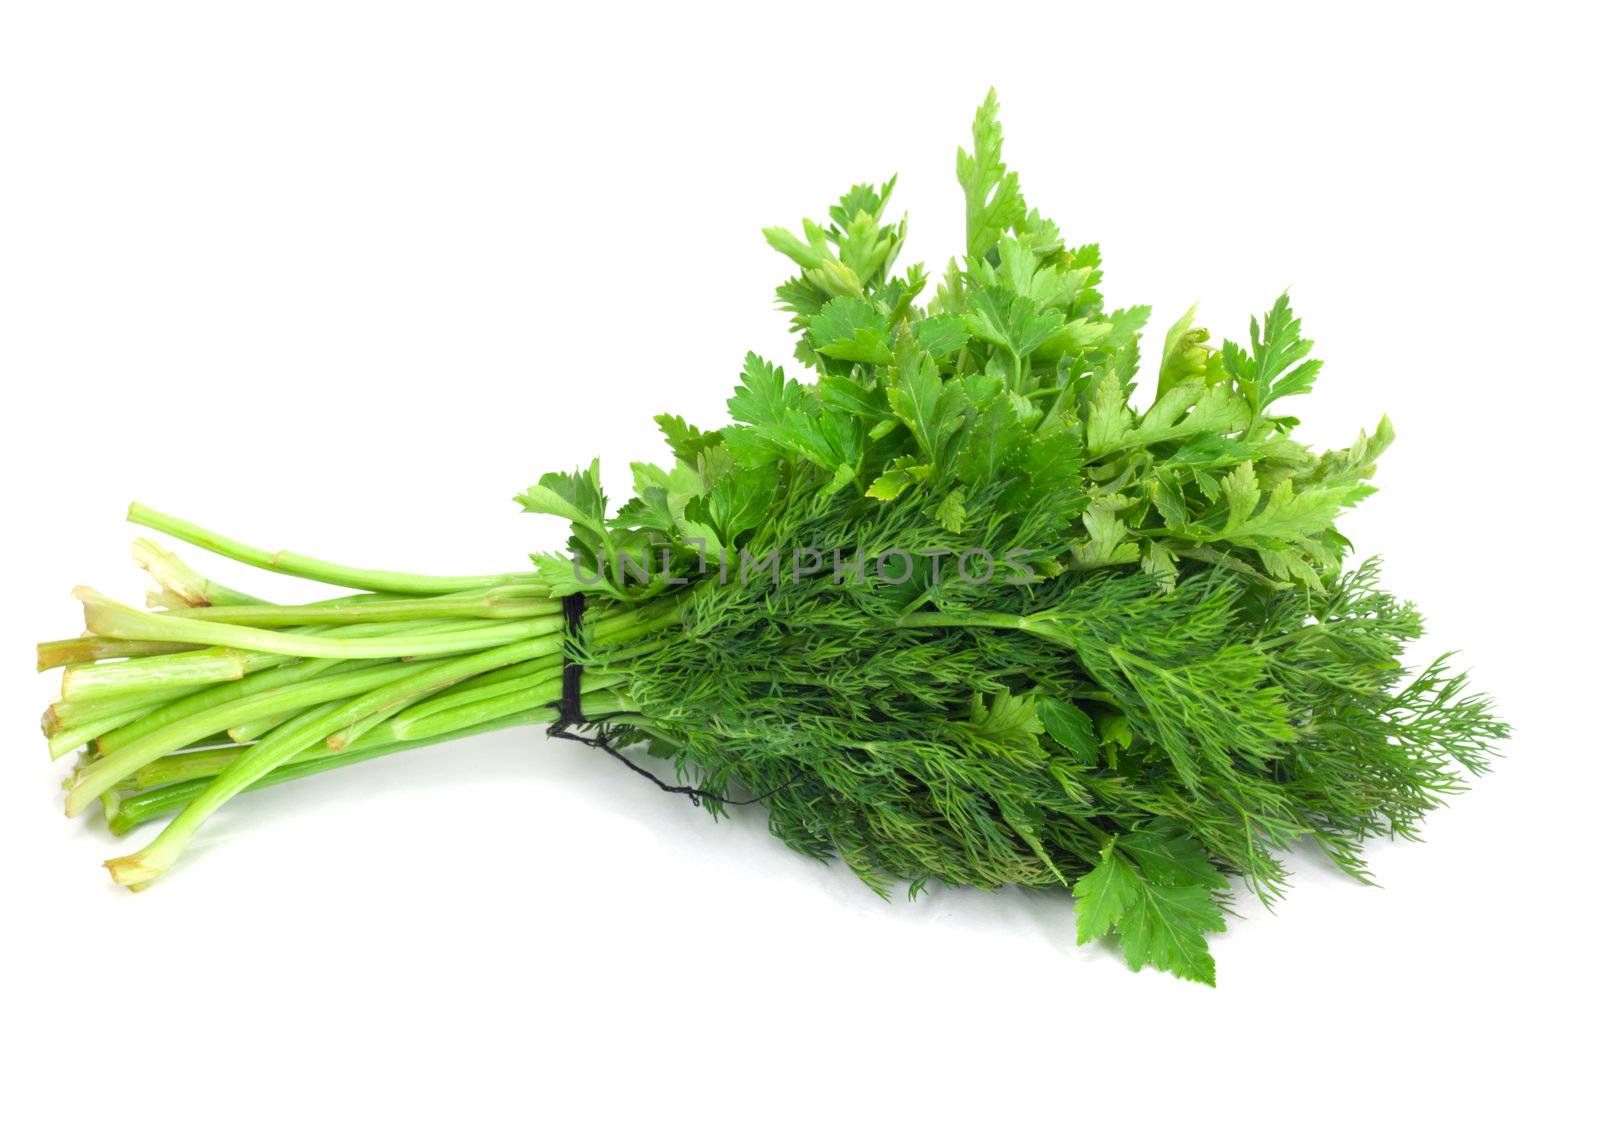 dill parsley to spices bunch isolated on white background  by schankz